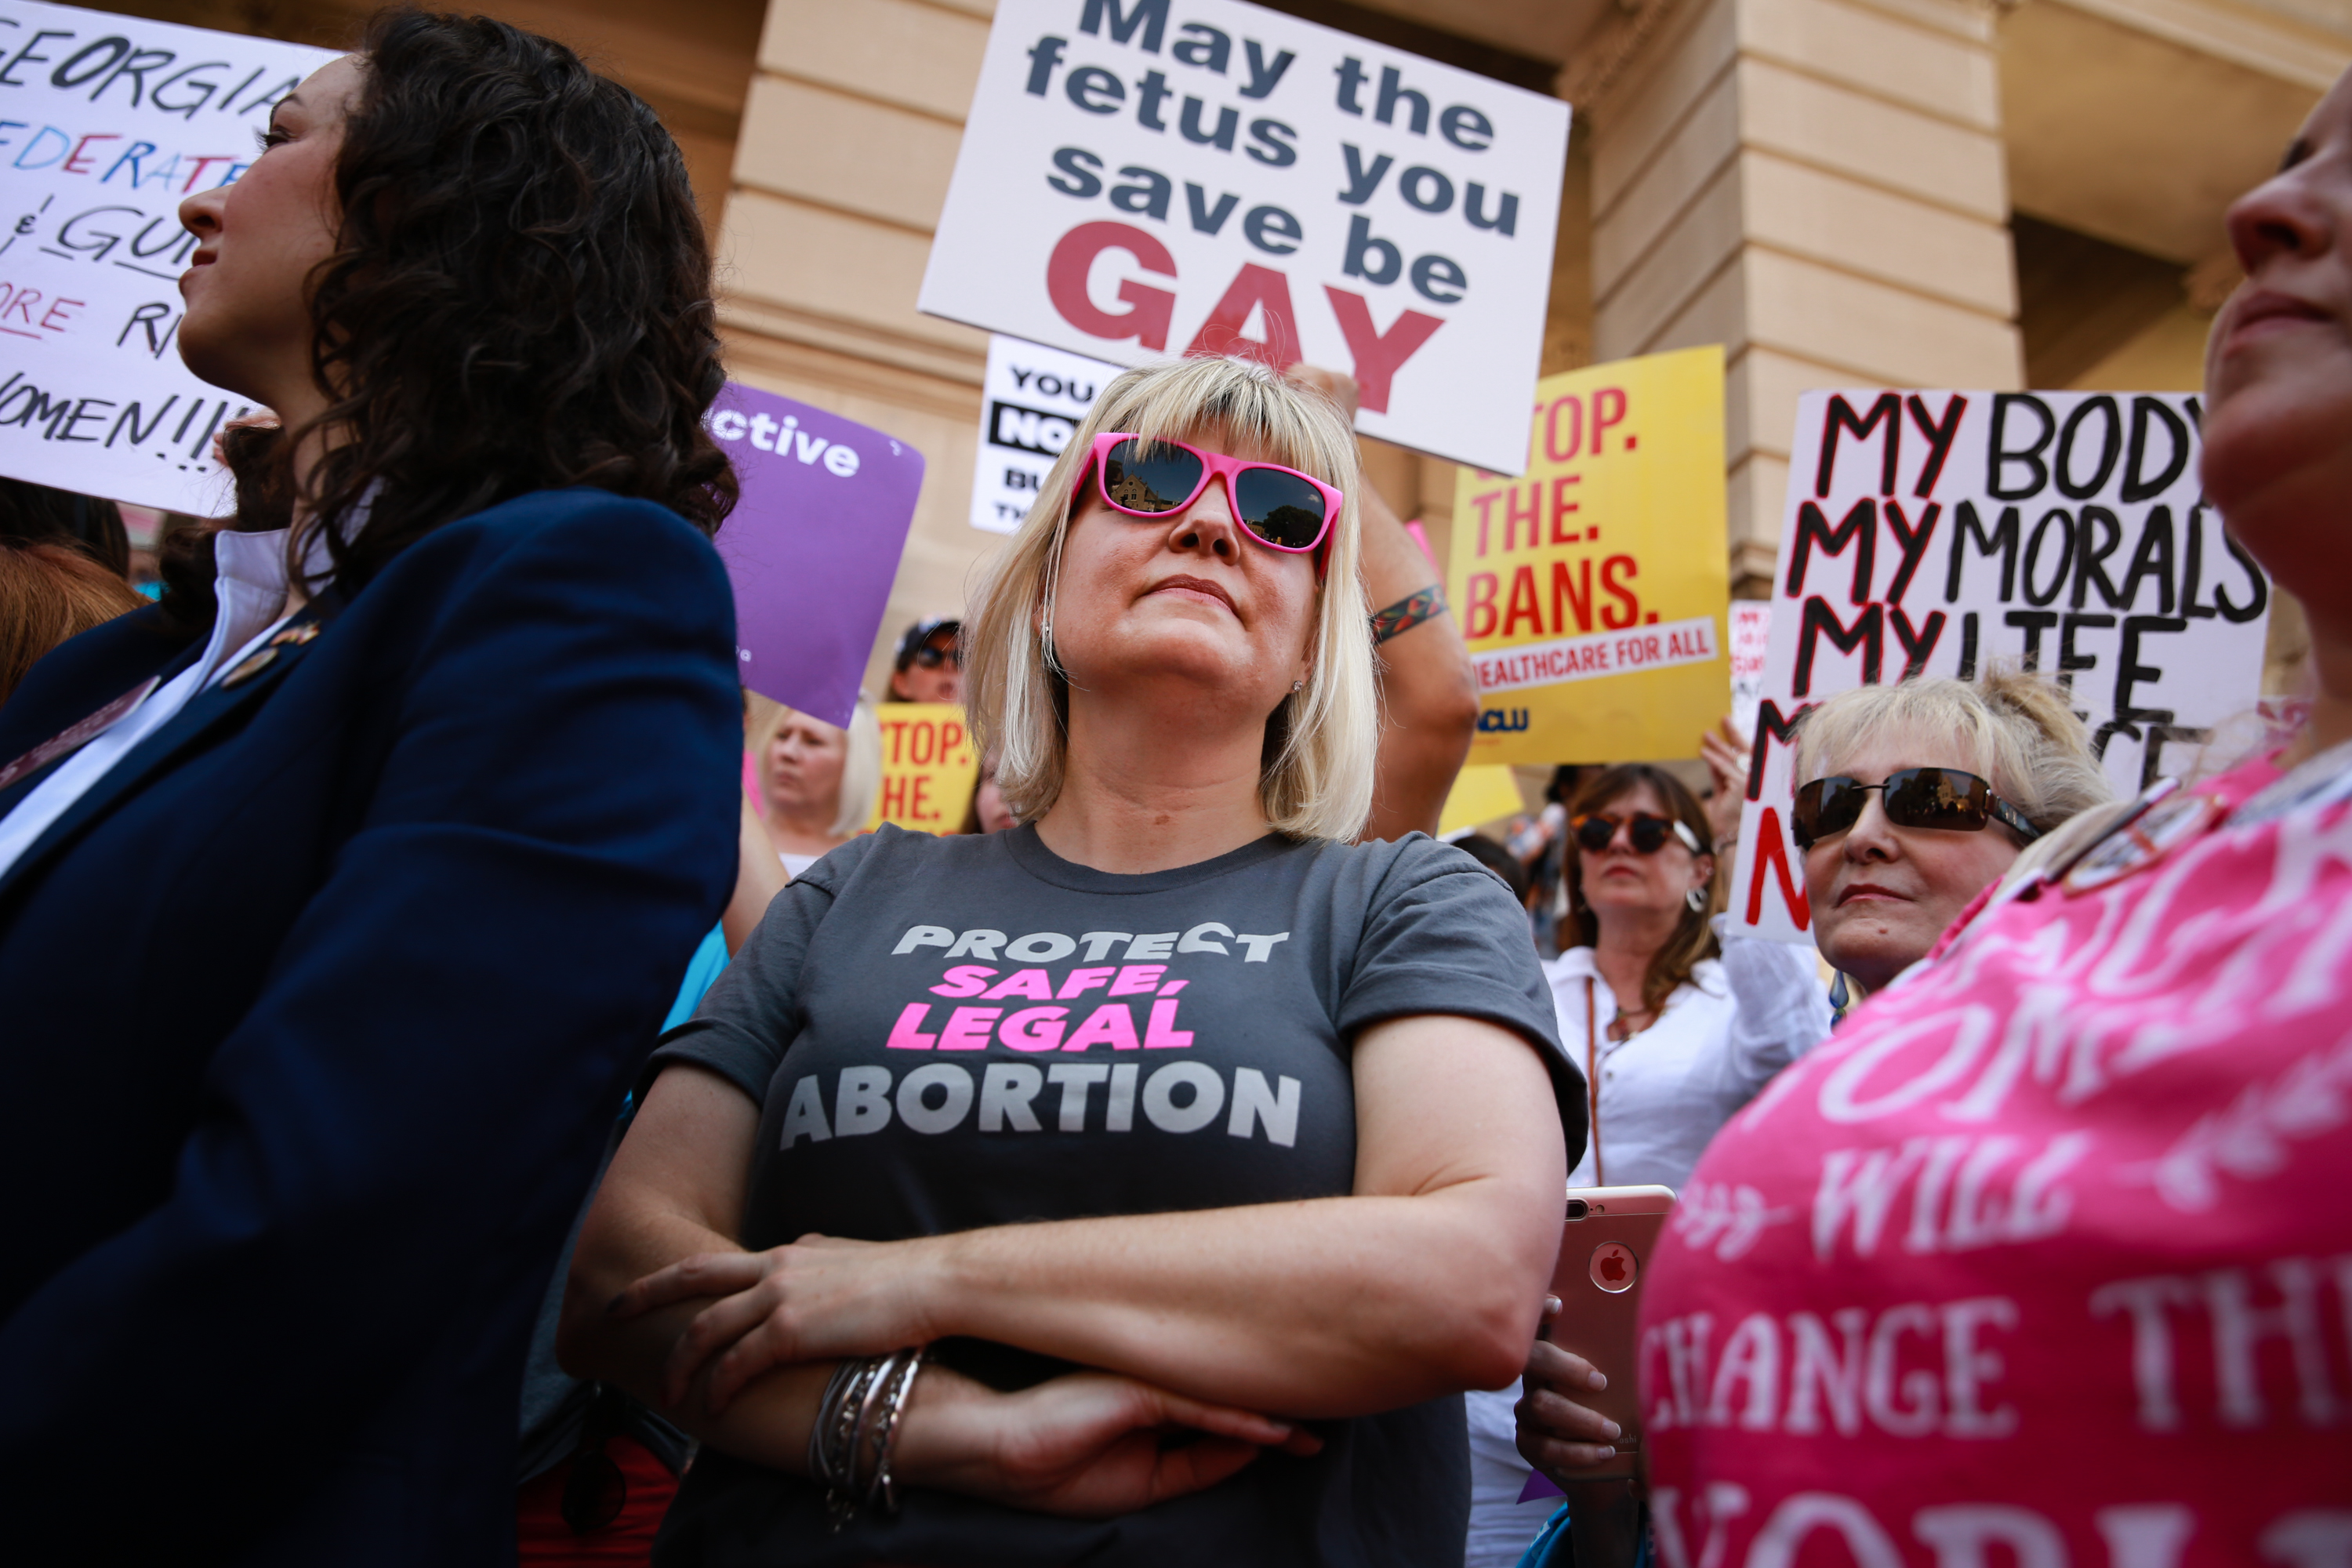 ATLANTA, GA - MAY 21: Staci Fox, CEO and President of Planned Parenthood Southeast, participates in a protest against recently passed abortion ban bills at the Georgia State Capitol building, on May 21, 2019 in Atlanta, Georgia. The Georgia "heartbeat" bill would ban abortion when a fetal heartbeat is detected. The Alabama abortion law, signed by Gov. Kay Ivey last week, includes no exceptions for cases of rape and incest, outlawing all abortions except when necessary to prevent serious health problems for the woman. Though women are exempt from criminal and civil liability, the new law punishes doctors for performing an abortion, making the procedure a Class A felony punishable by up to 99 years in prison (Photo by Elijah Nouvelage/Getty Images)